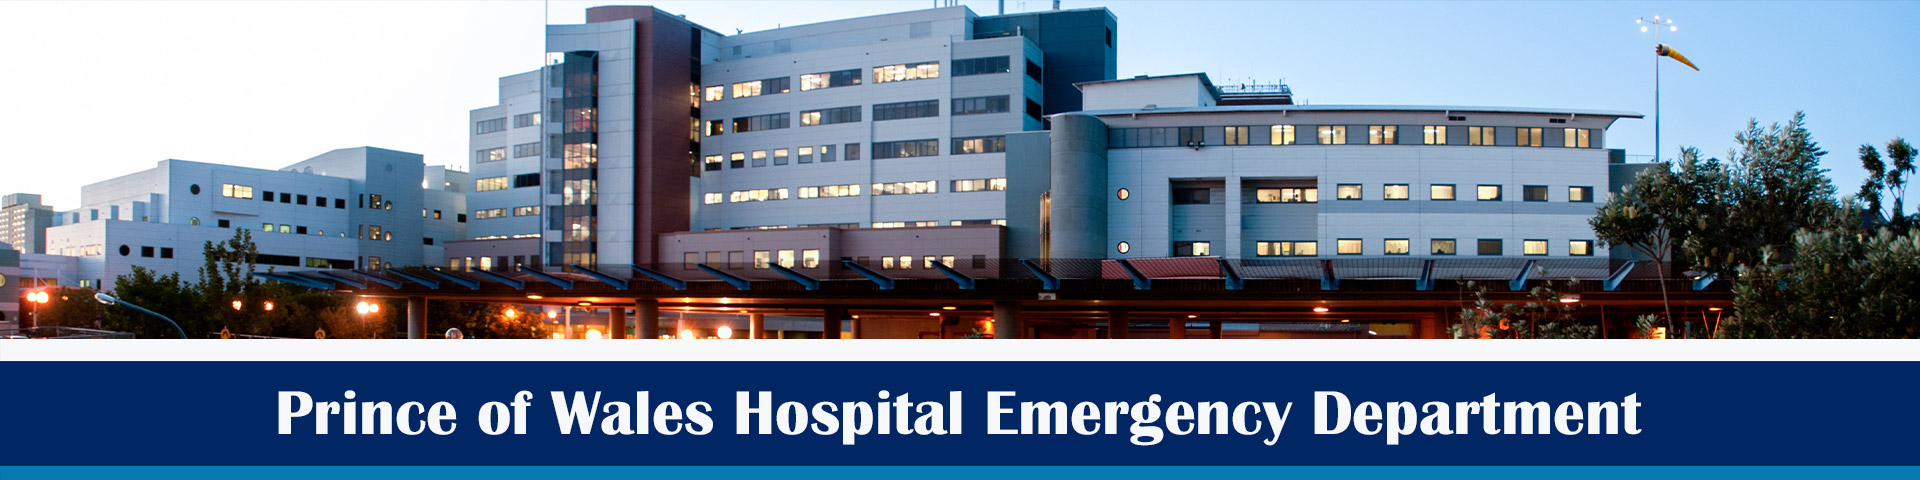 Prince of Wales Hospital Emergency Department